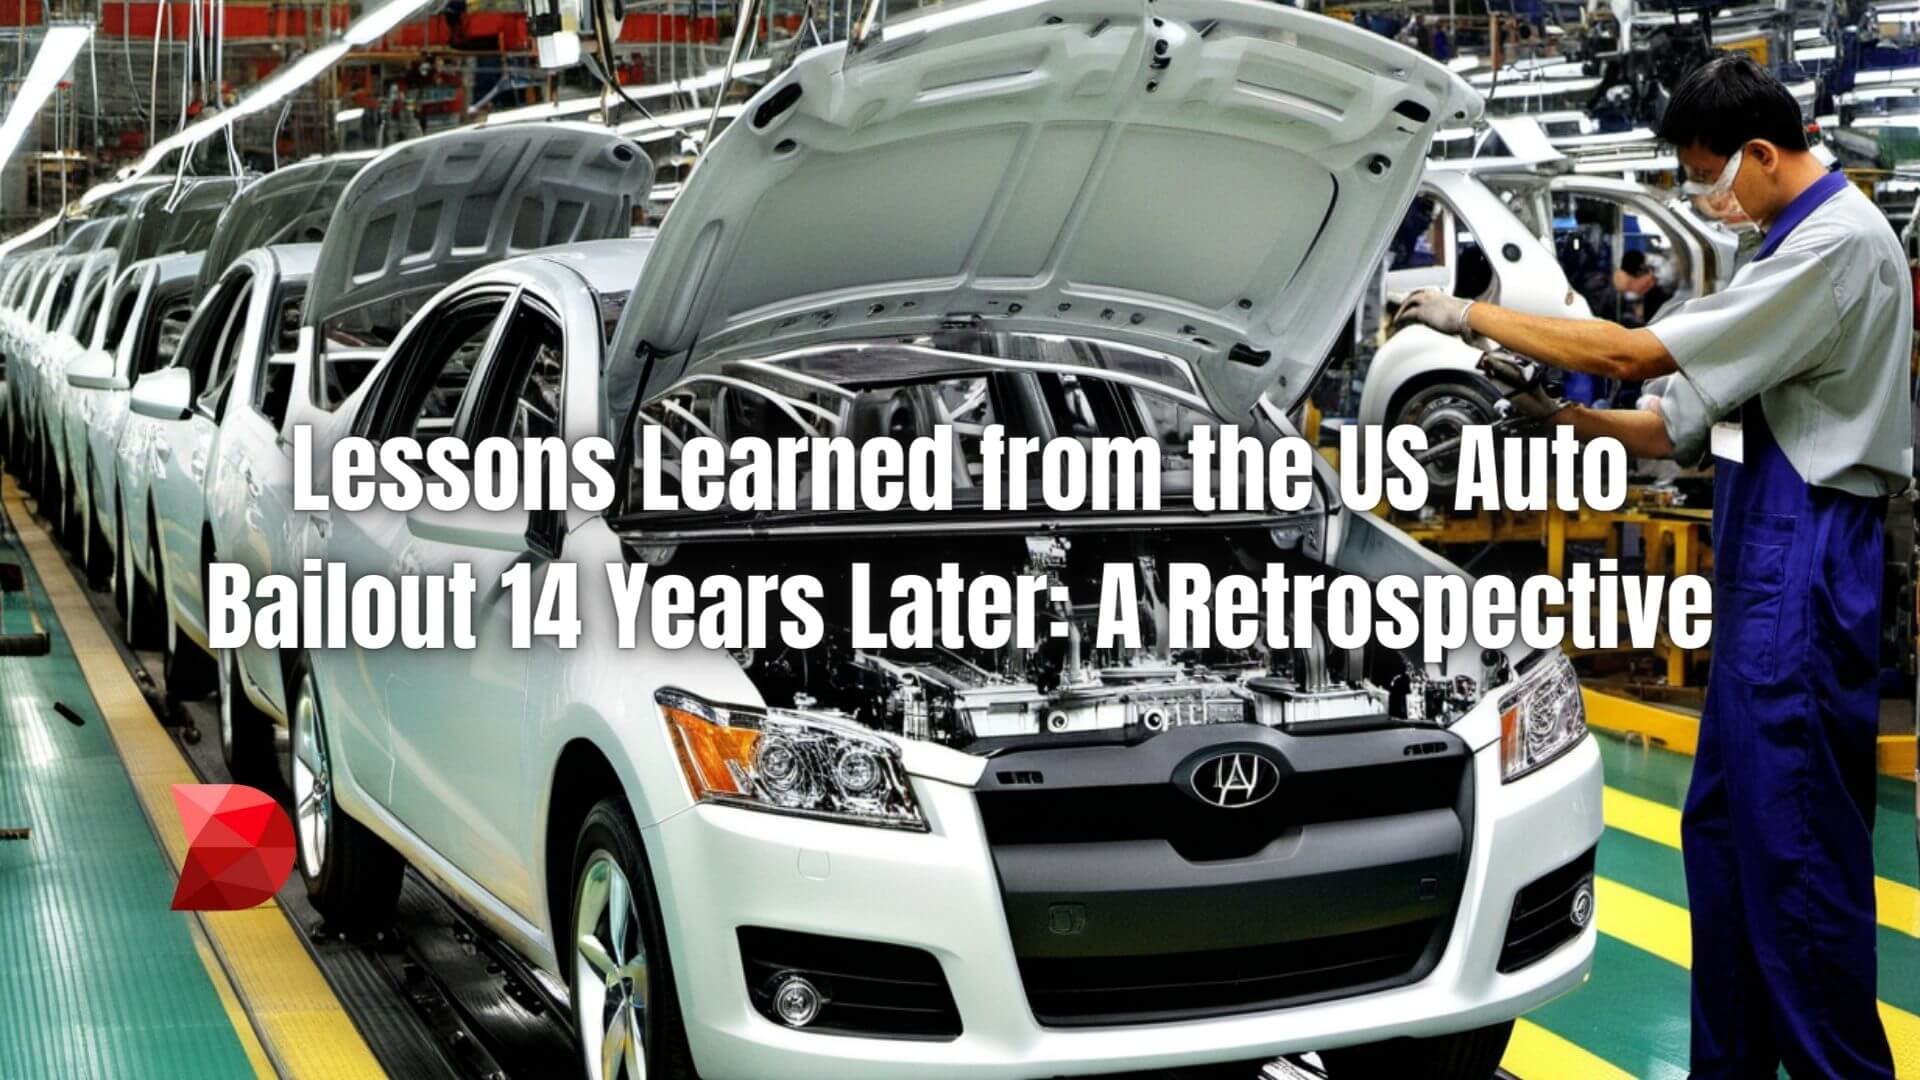 Discover key insights from the United States Auto Bailout aftermath 14 years later. Learn valuable lessons for navigating economic crises.